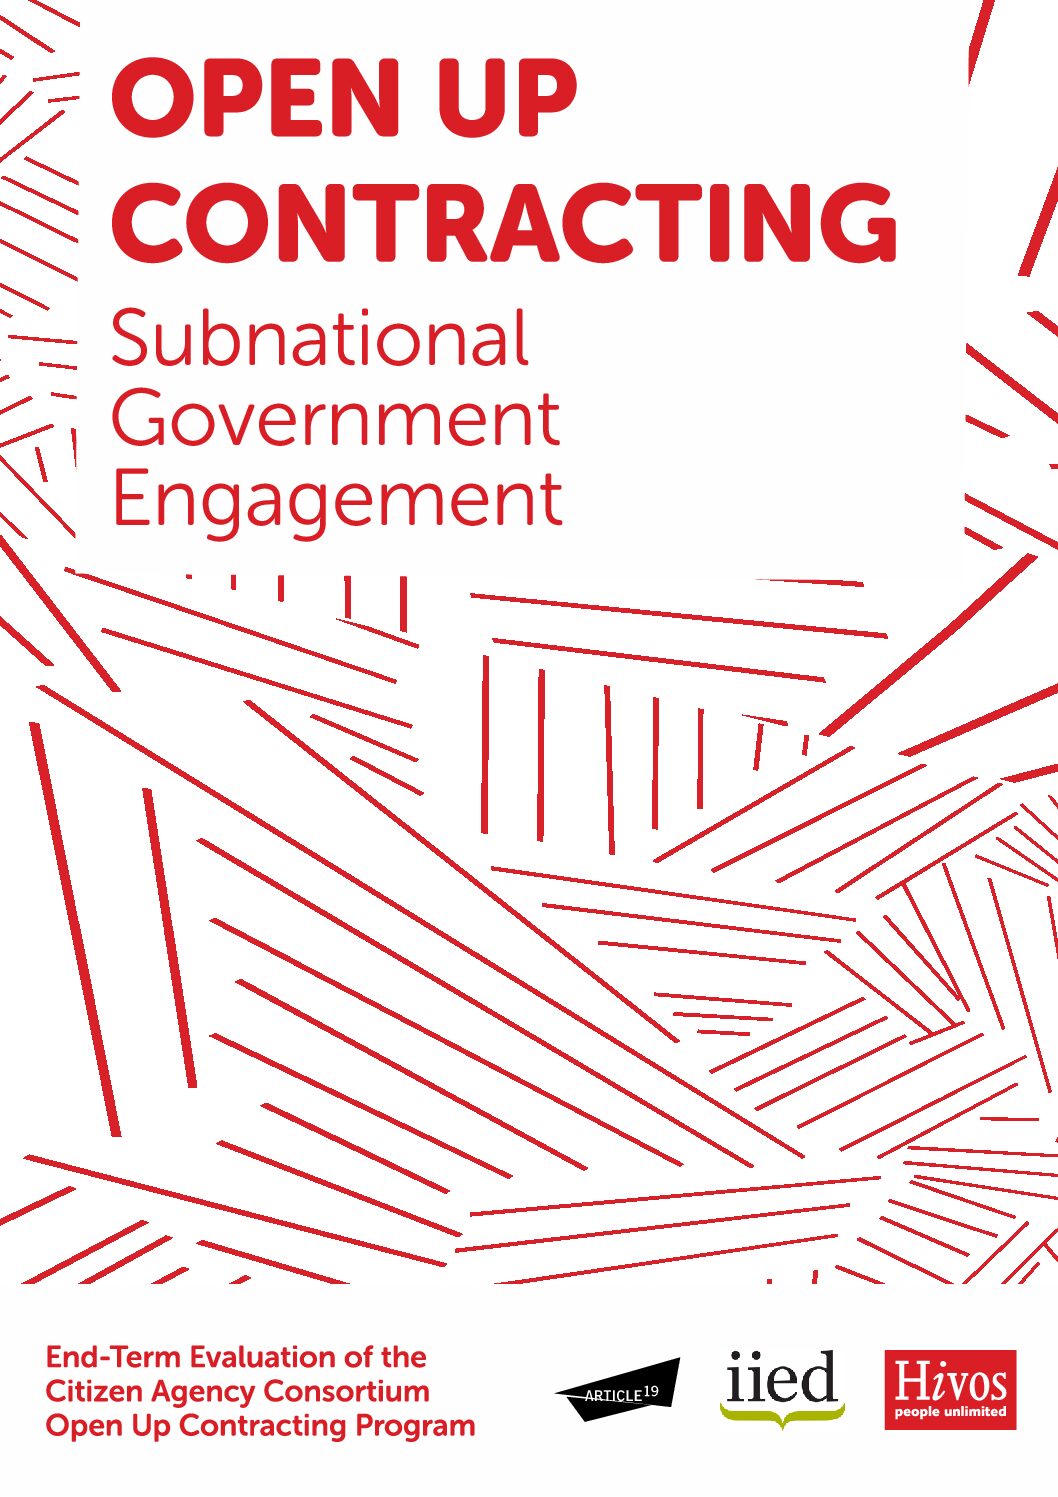 Evaluation of program: Subnational government engagement casestudy